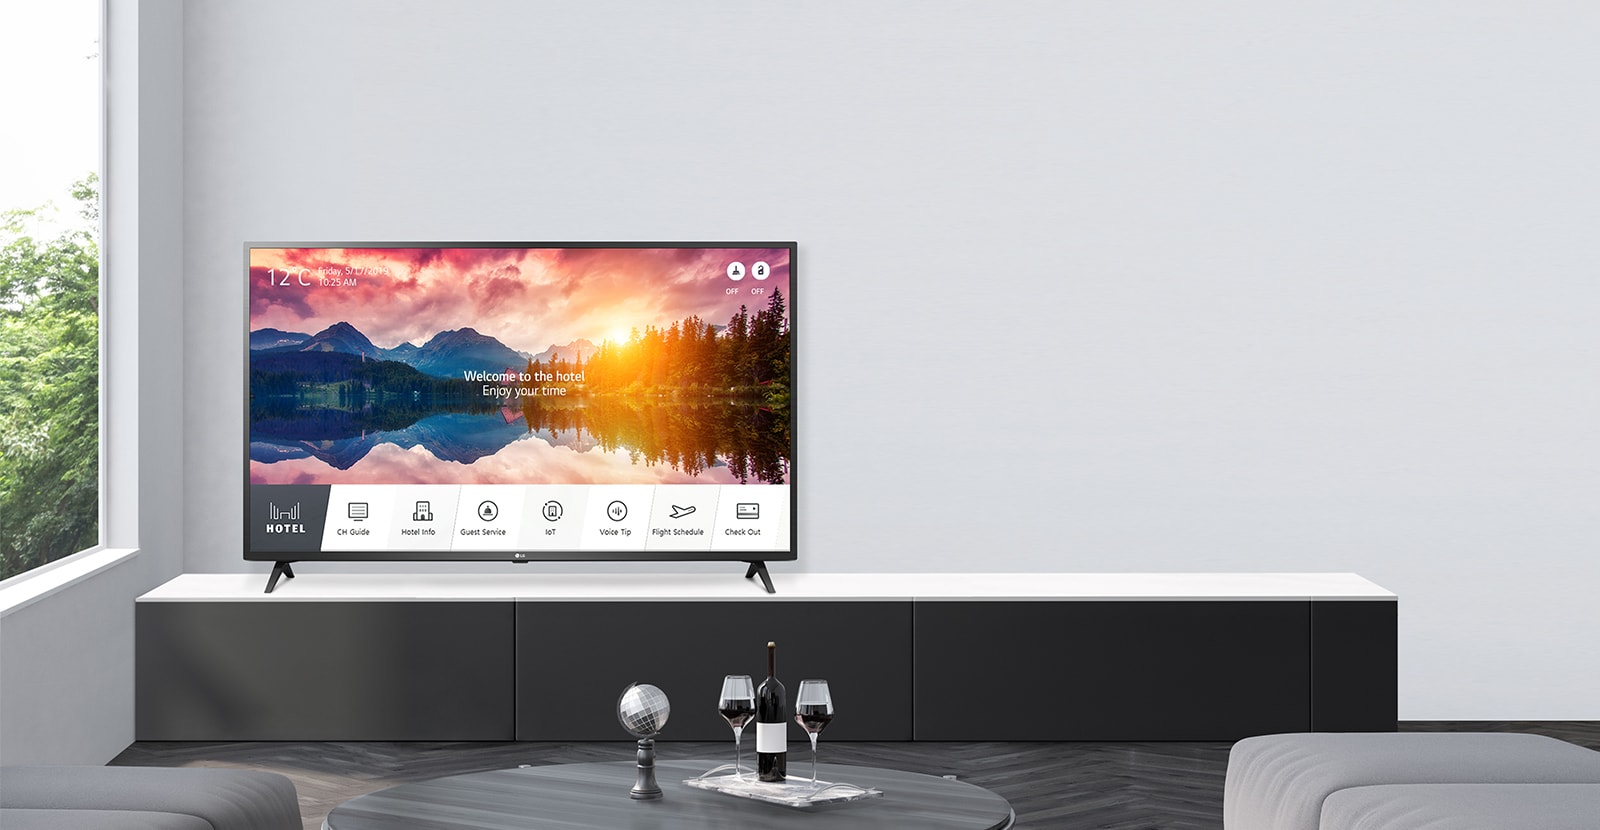 LG Smart Hotel TV with Effective Content Management